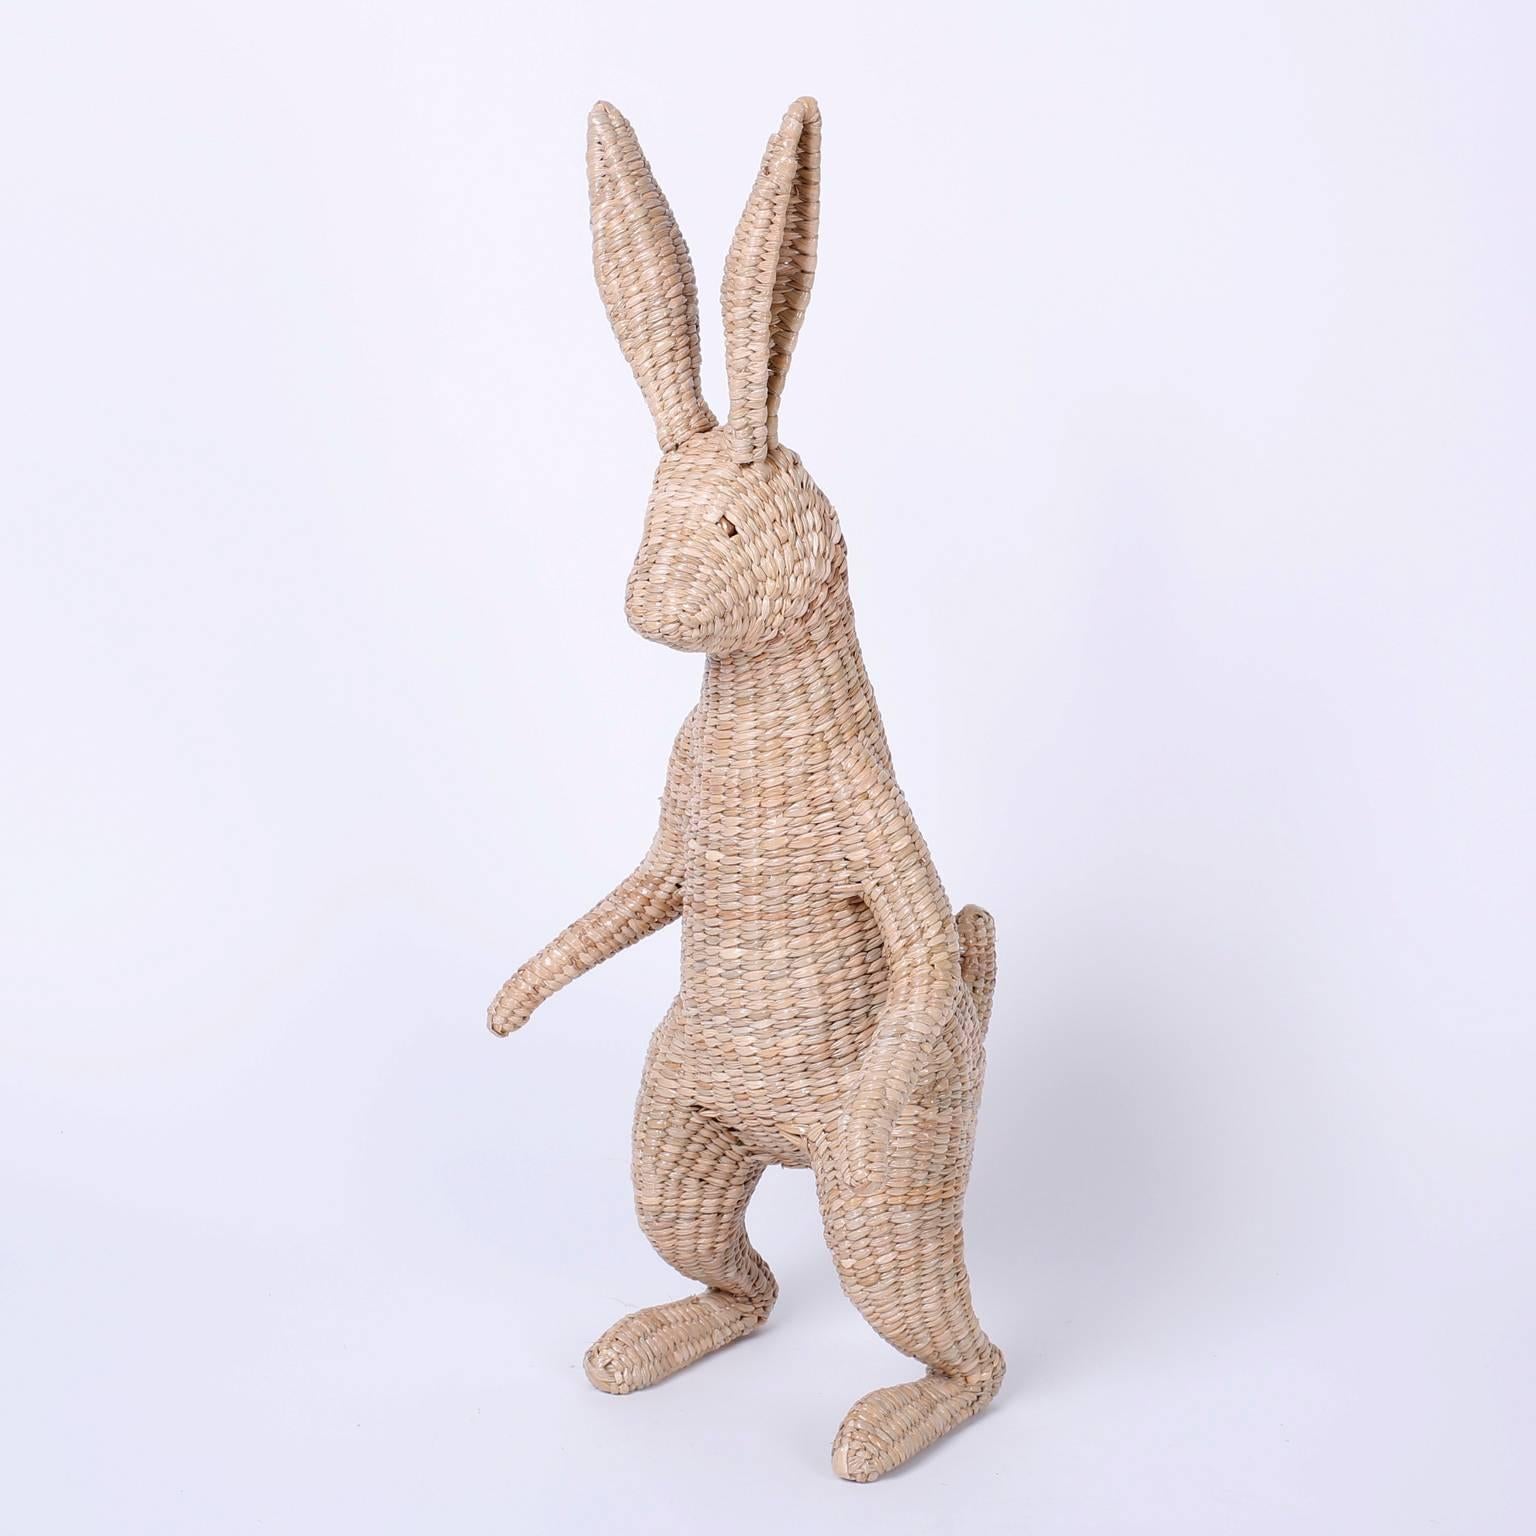 Midcentury rabbit with an amusing fairy tale inspired presence. Constructed with wicker reed over a metal frame. Signed Mario Torres 1974 on a brass medallion. Contemporary.

 